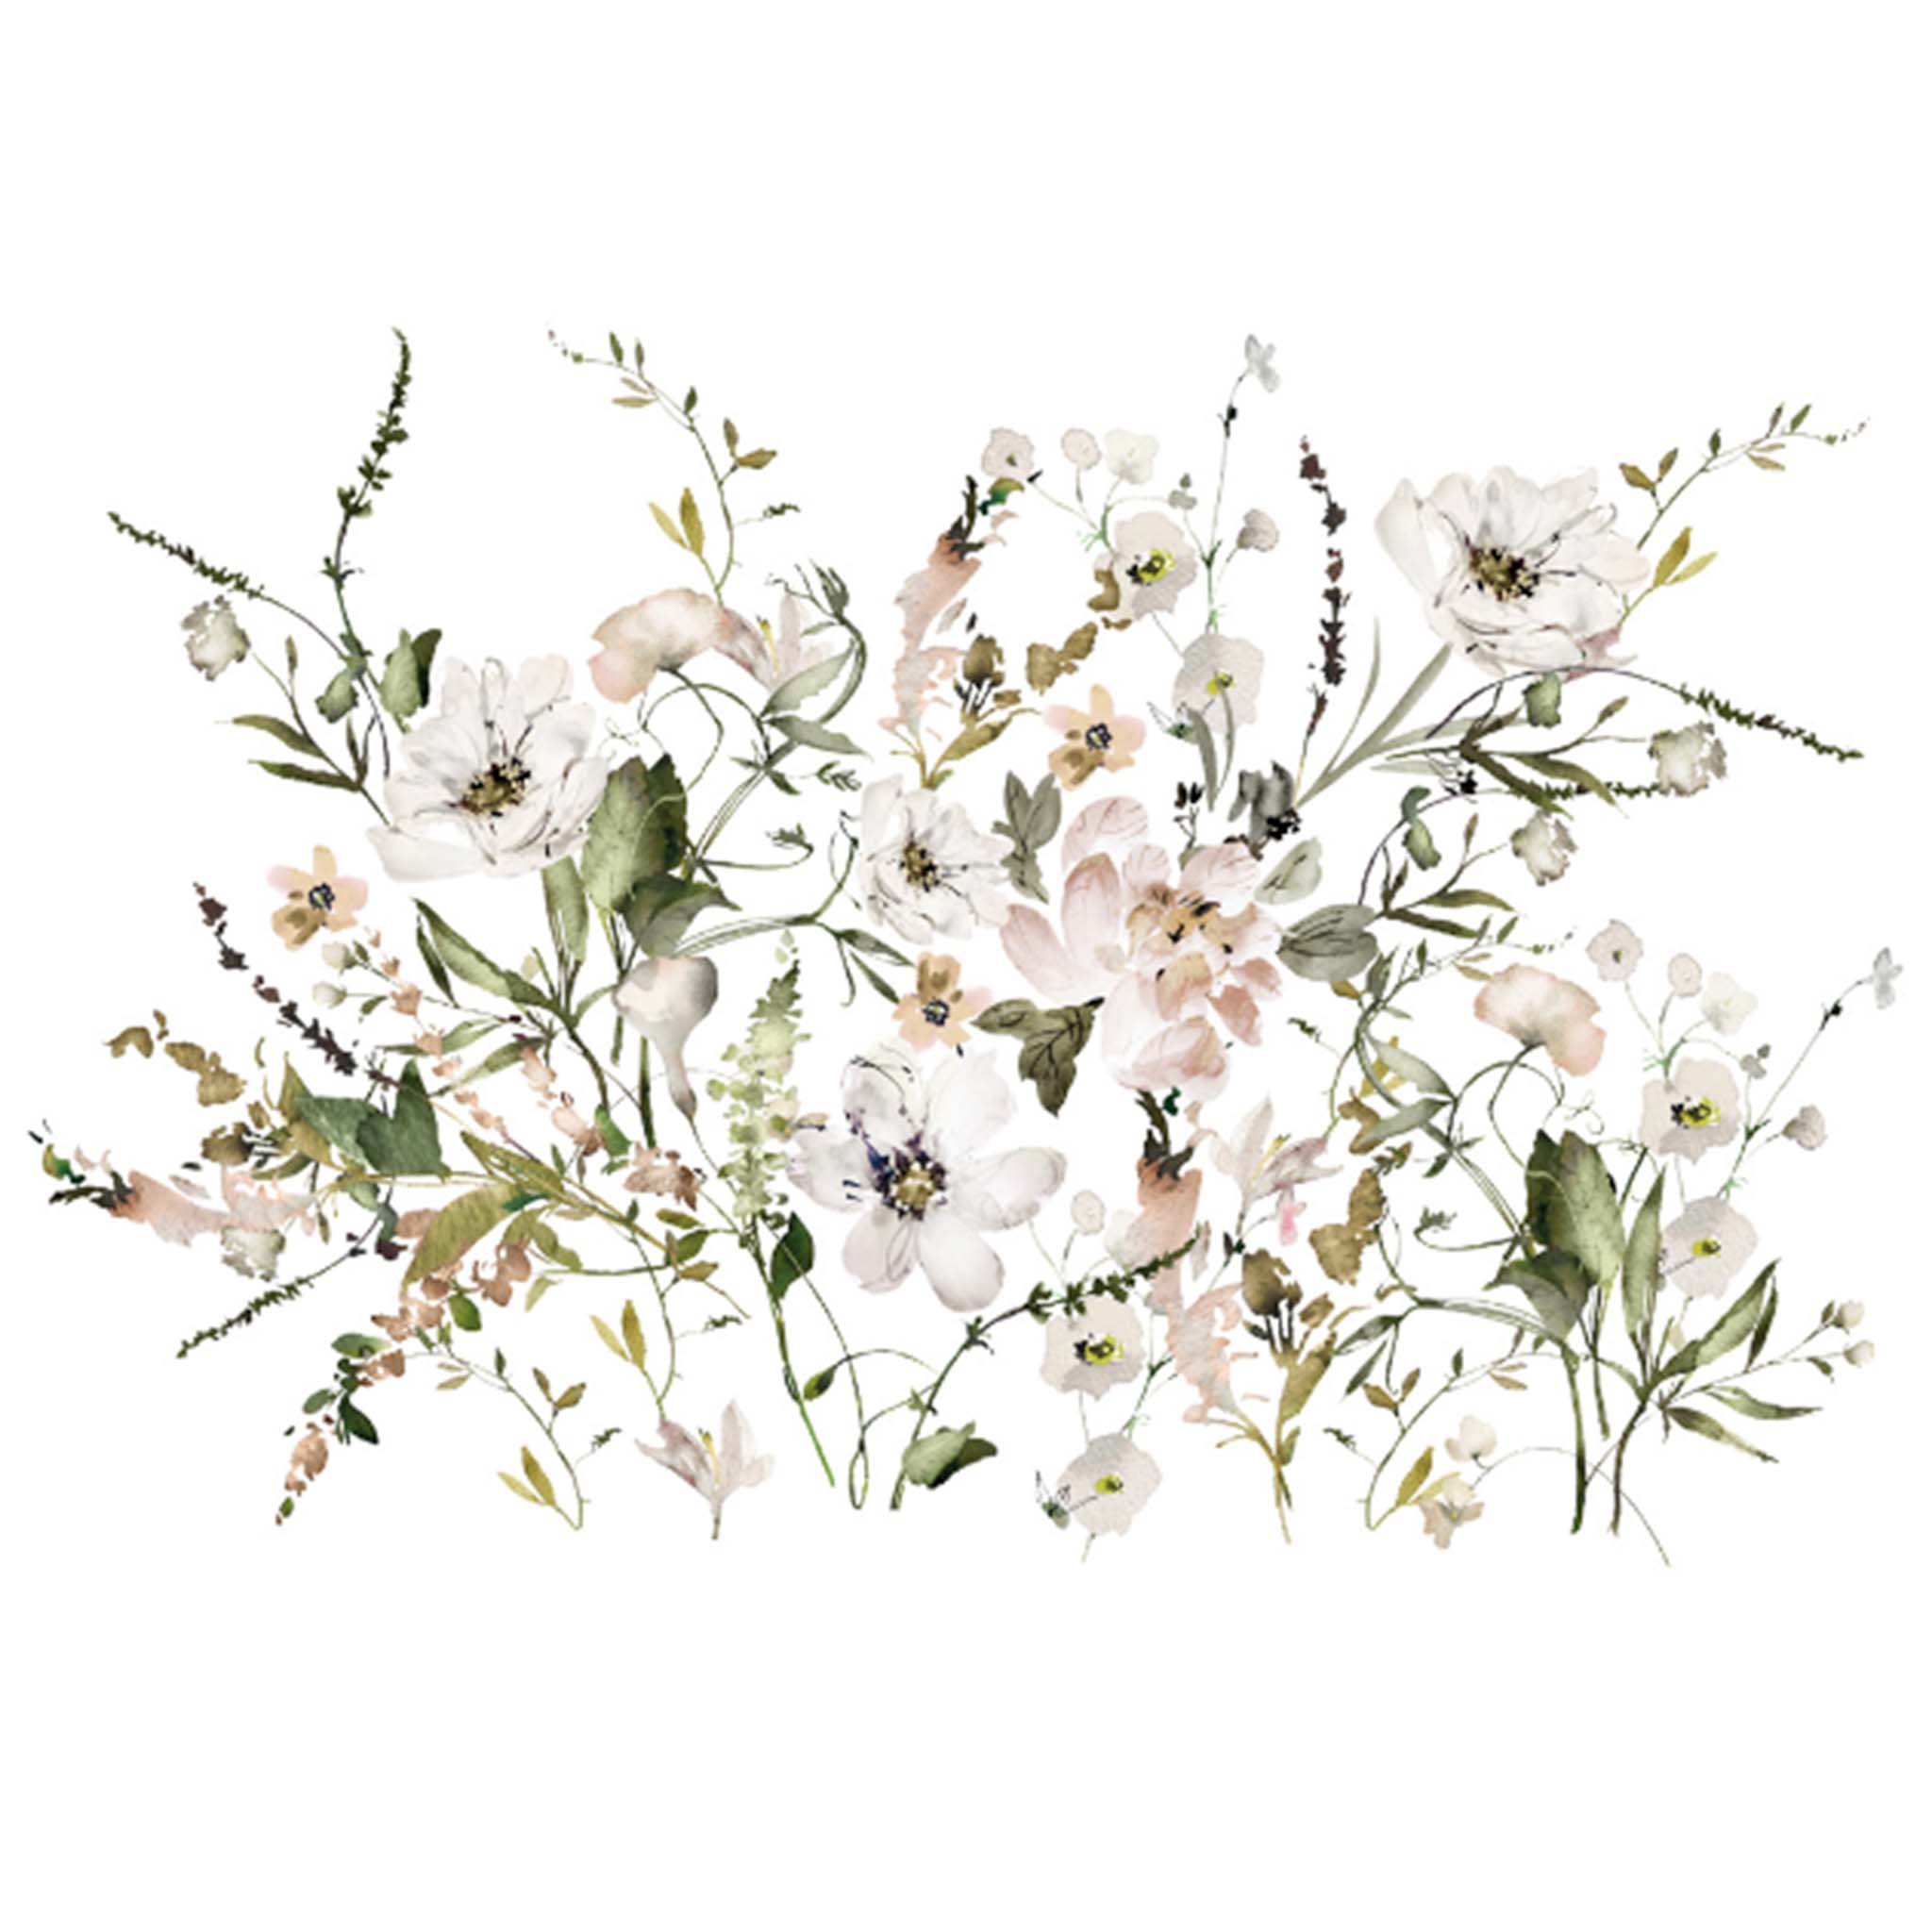 Rub-on transfer design against a white background that features charming blush, cream, and white flowers surrounded by lush greenery.